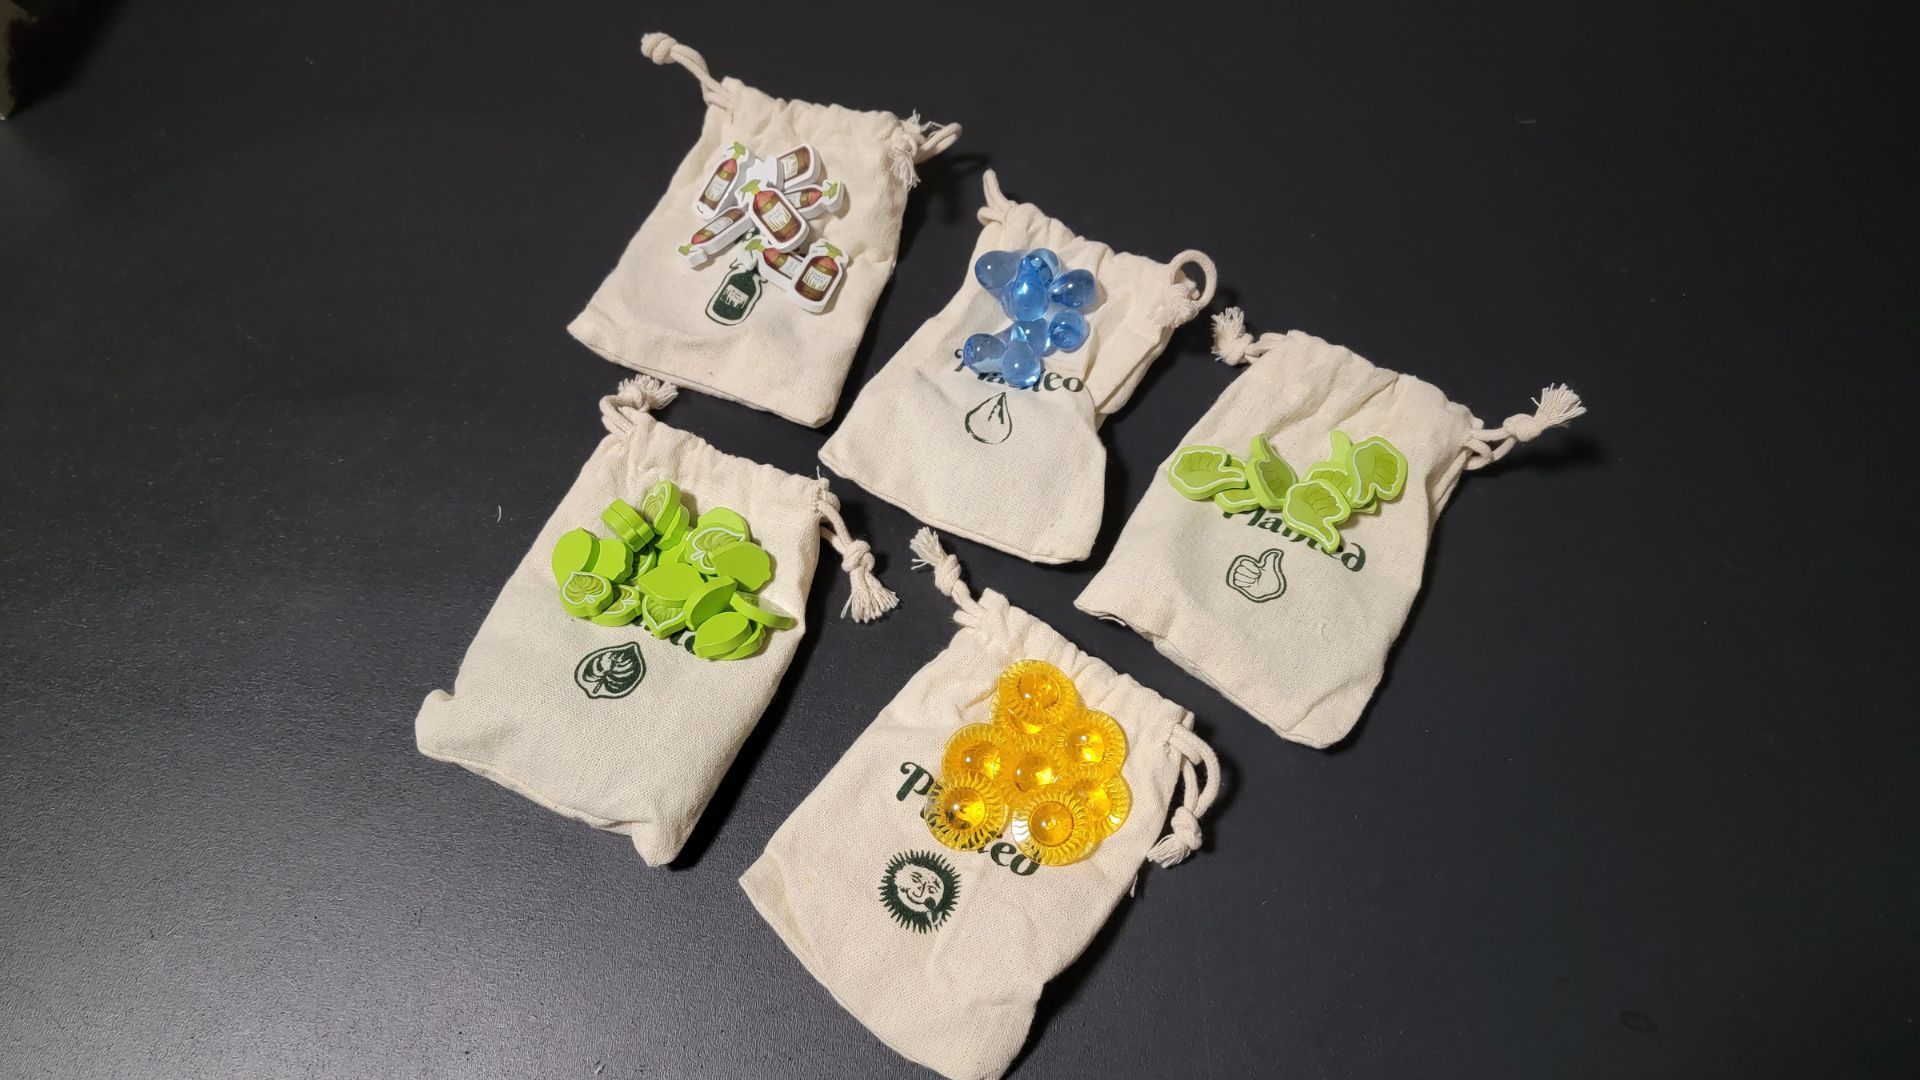 Planted board game resource tokens and cloth storage bags